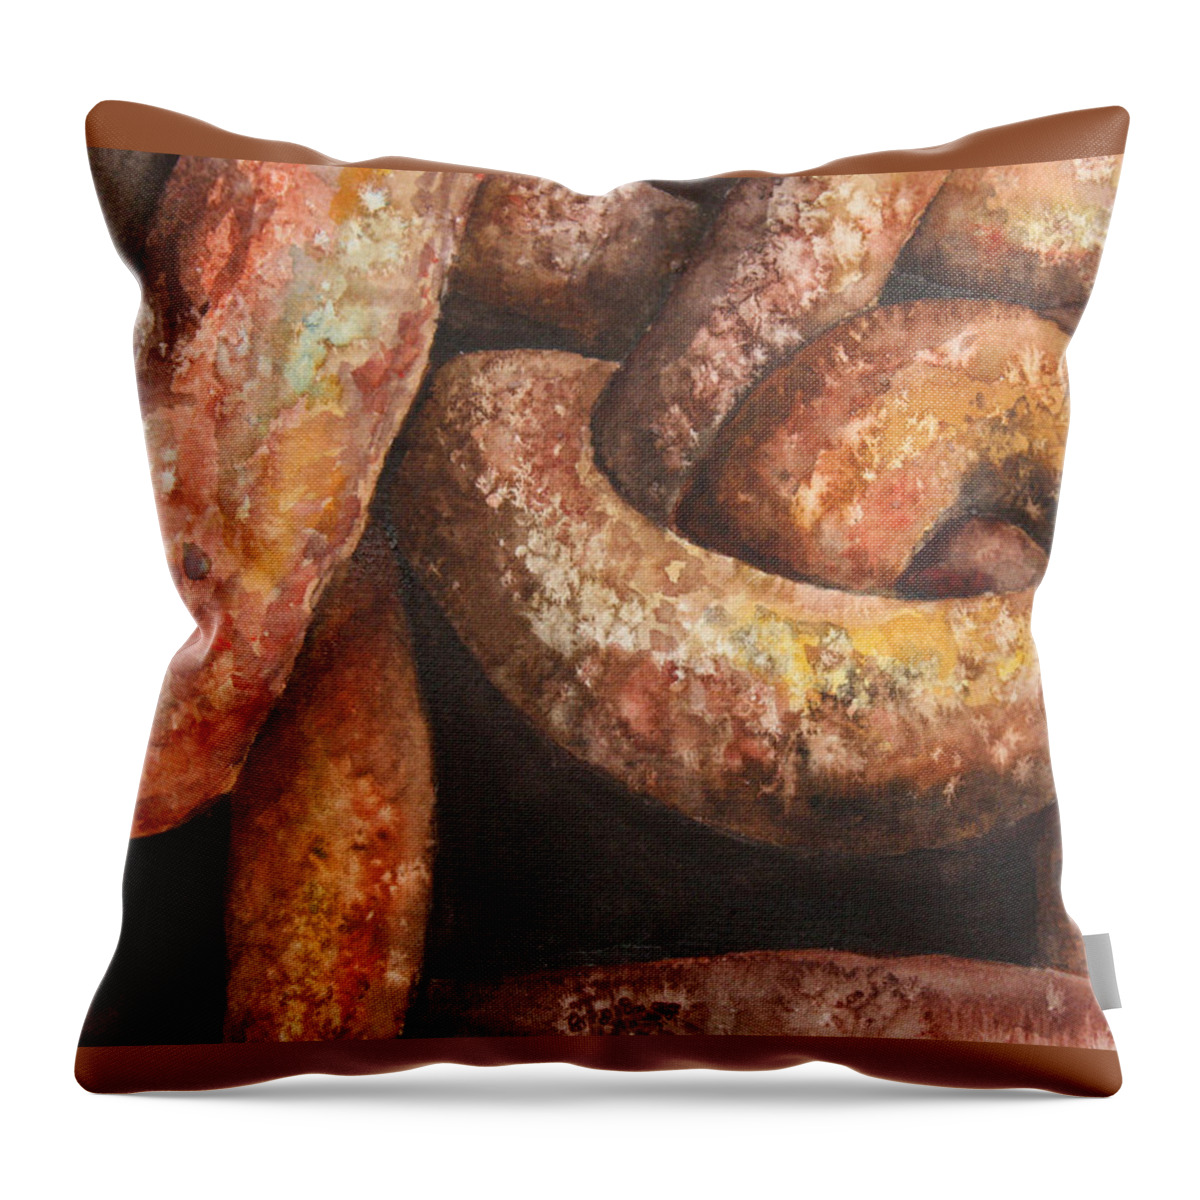 Rusty Throw Pillow featuring the painting A Lil' Rusty by Rachel Bochnia